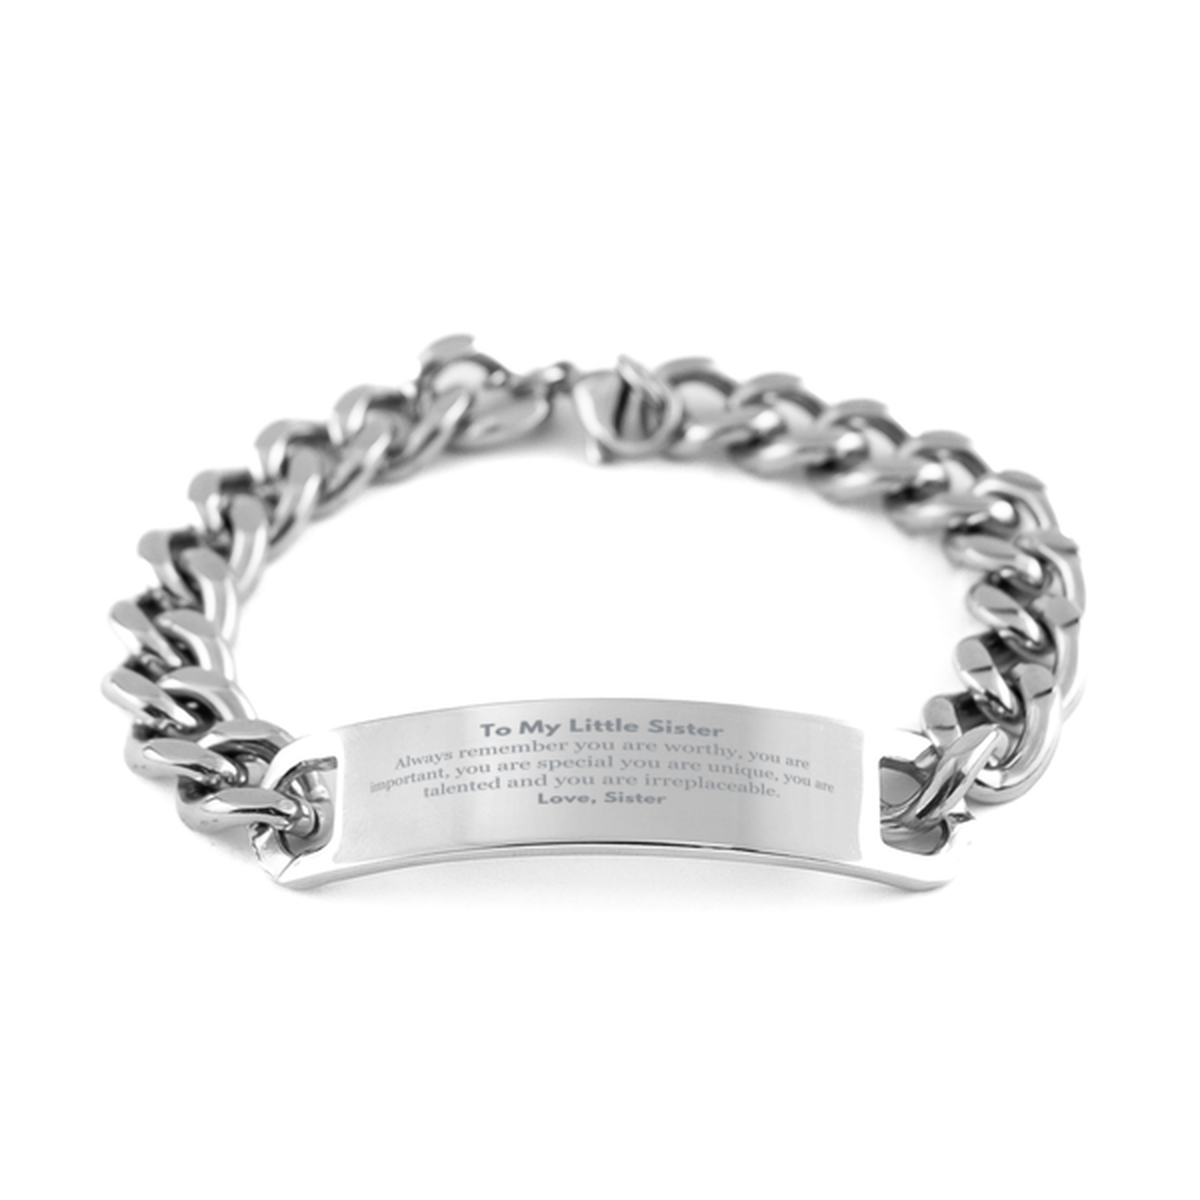 Little Sister Birthday Gifts from Sister, Inspirational Cuban Chain Stainless Steel Bracelet for Little Sister Christmas Graduation Gifts for Little Sister Always remember you are worthy, you are important. Love, Sister